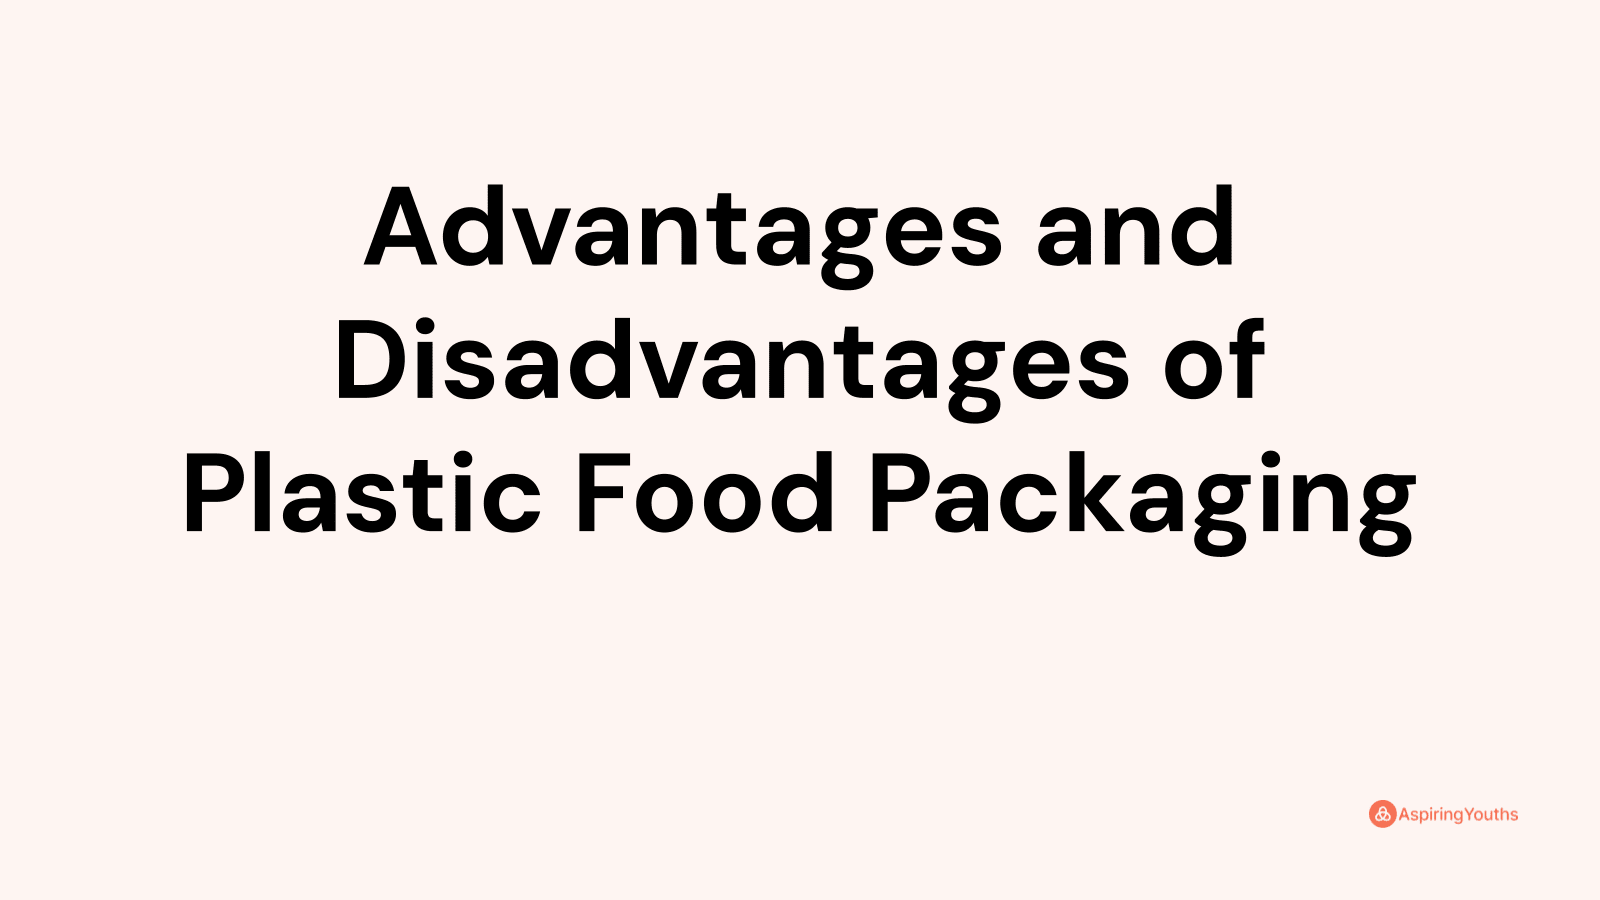 Advantages and disadvantages of Plastic Food Packaging